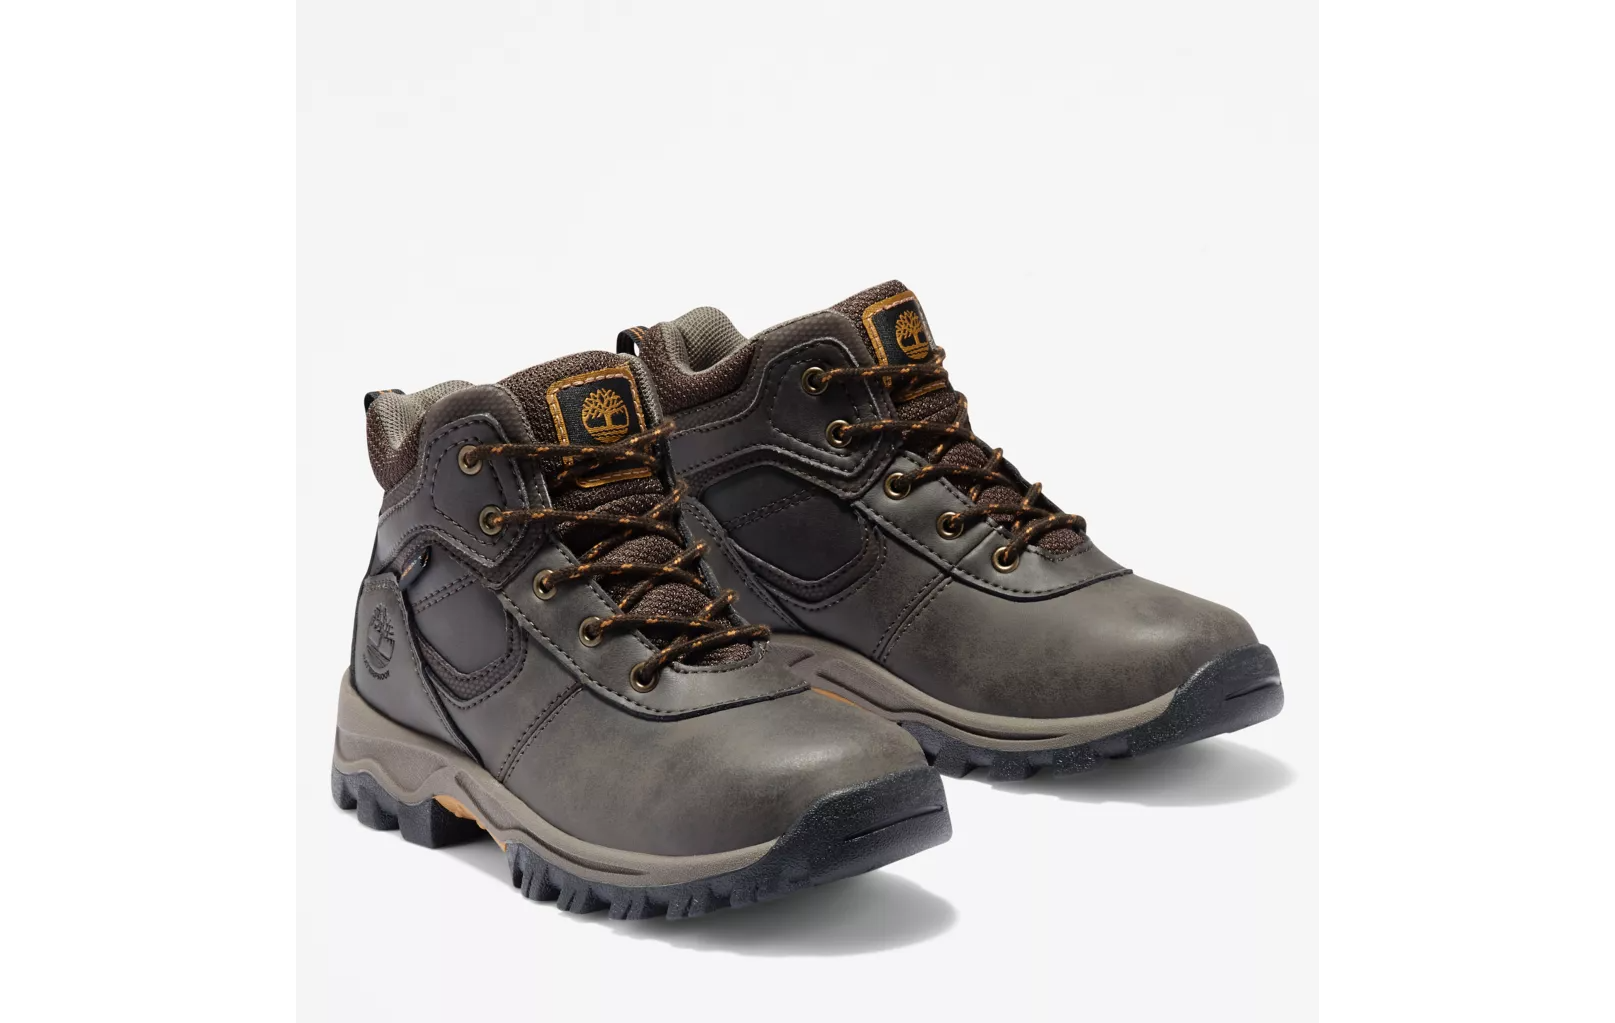 TIMBERLAND YOUTH MT MADDSEN MID HIKERS | ruggednorth.ca